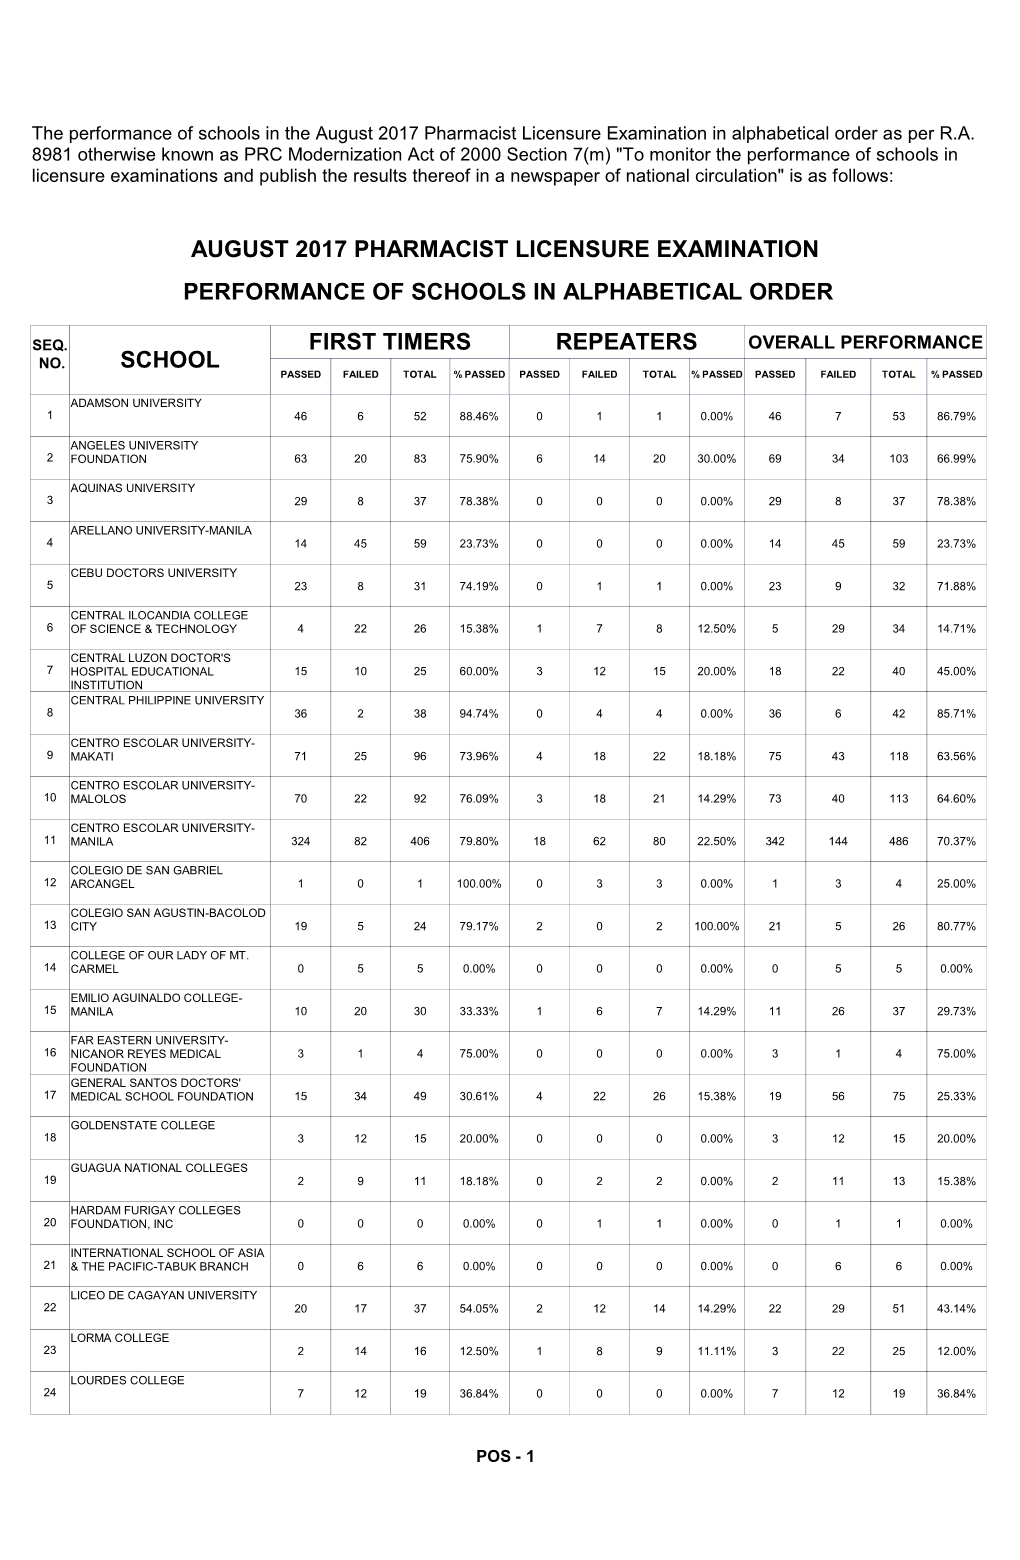 Performance of Schools in the August 2017 Pharmacist Licensure Examination in Alphabetical Order As Per R.A